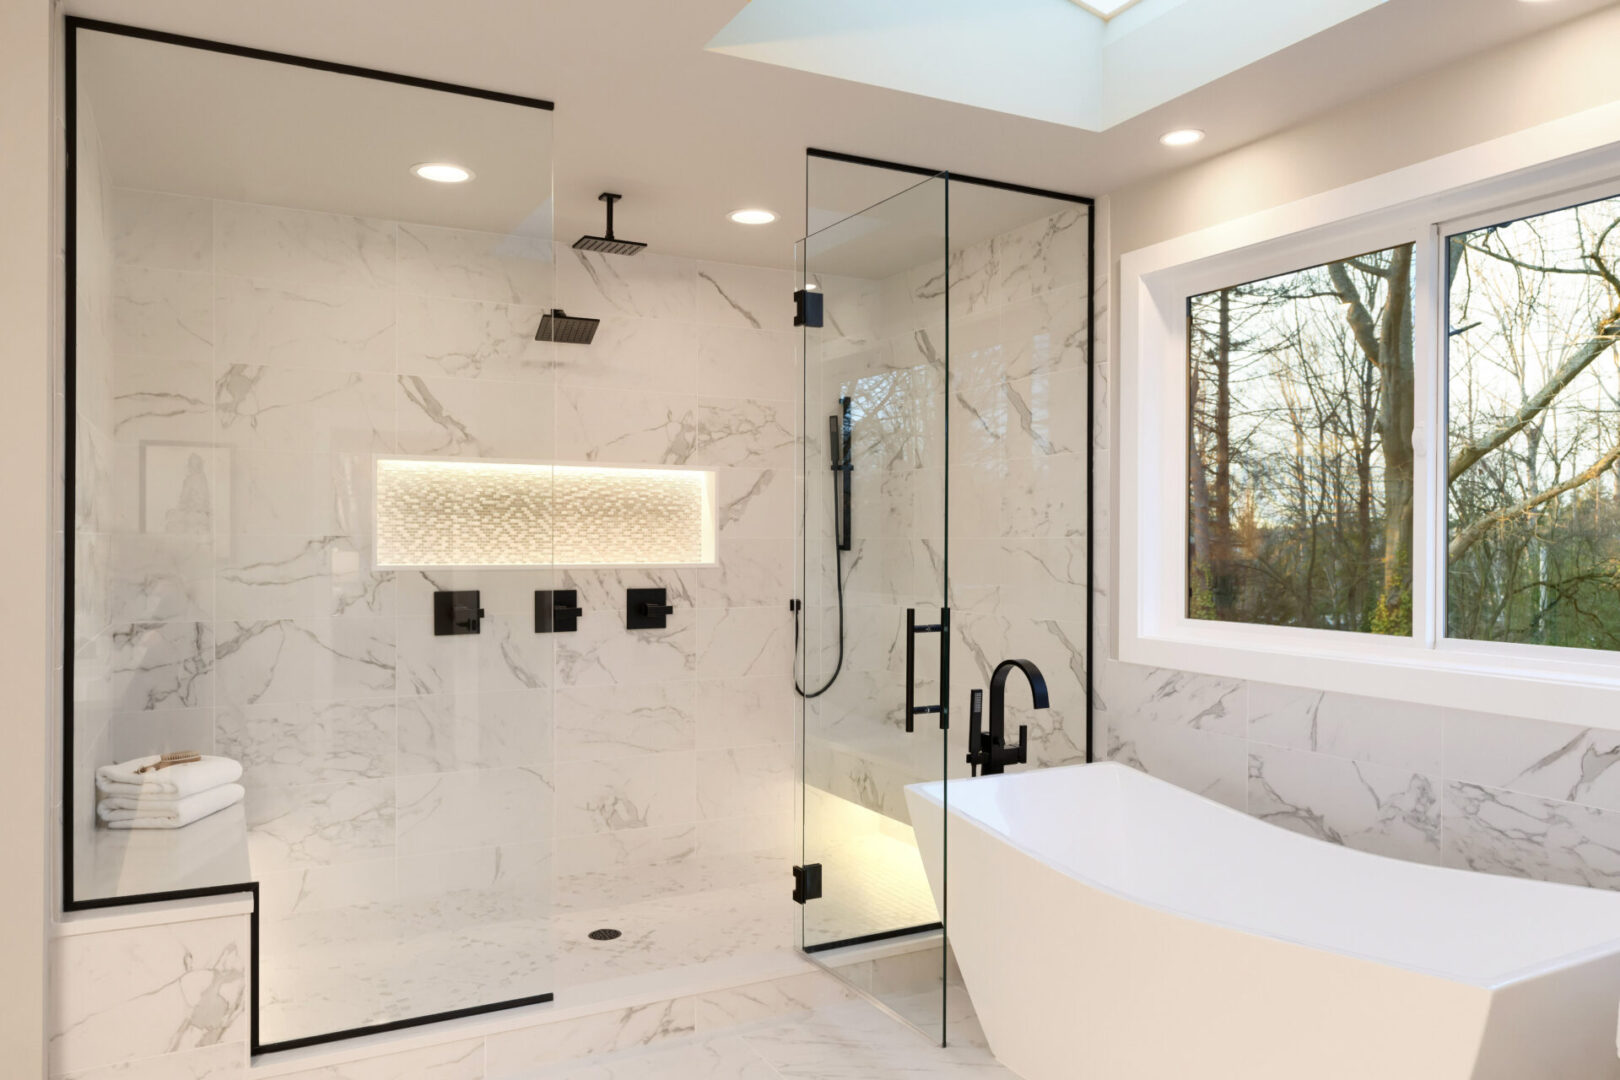 A bathroom with a large walk in shower and a tub.